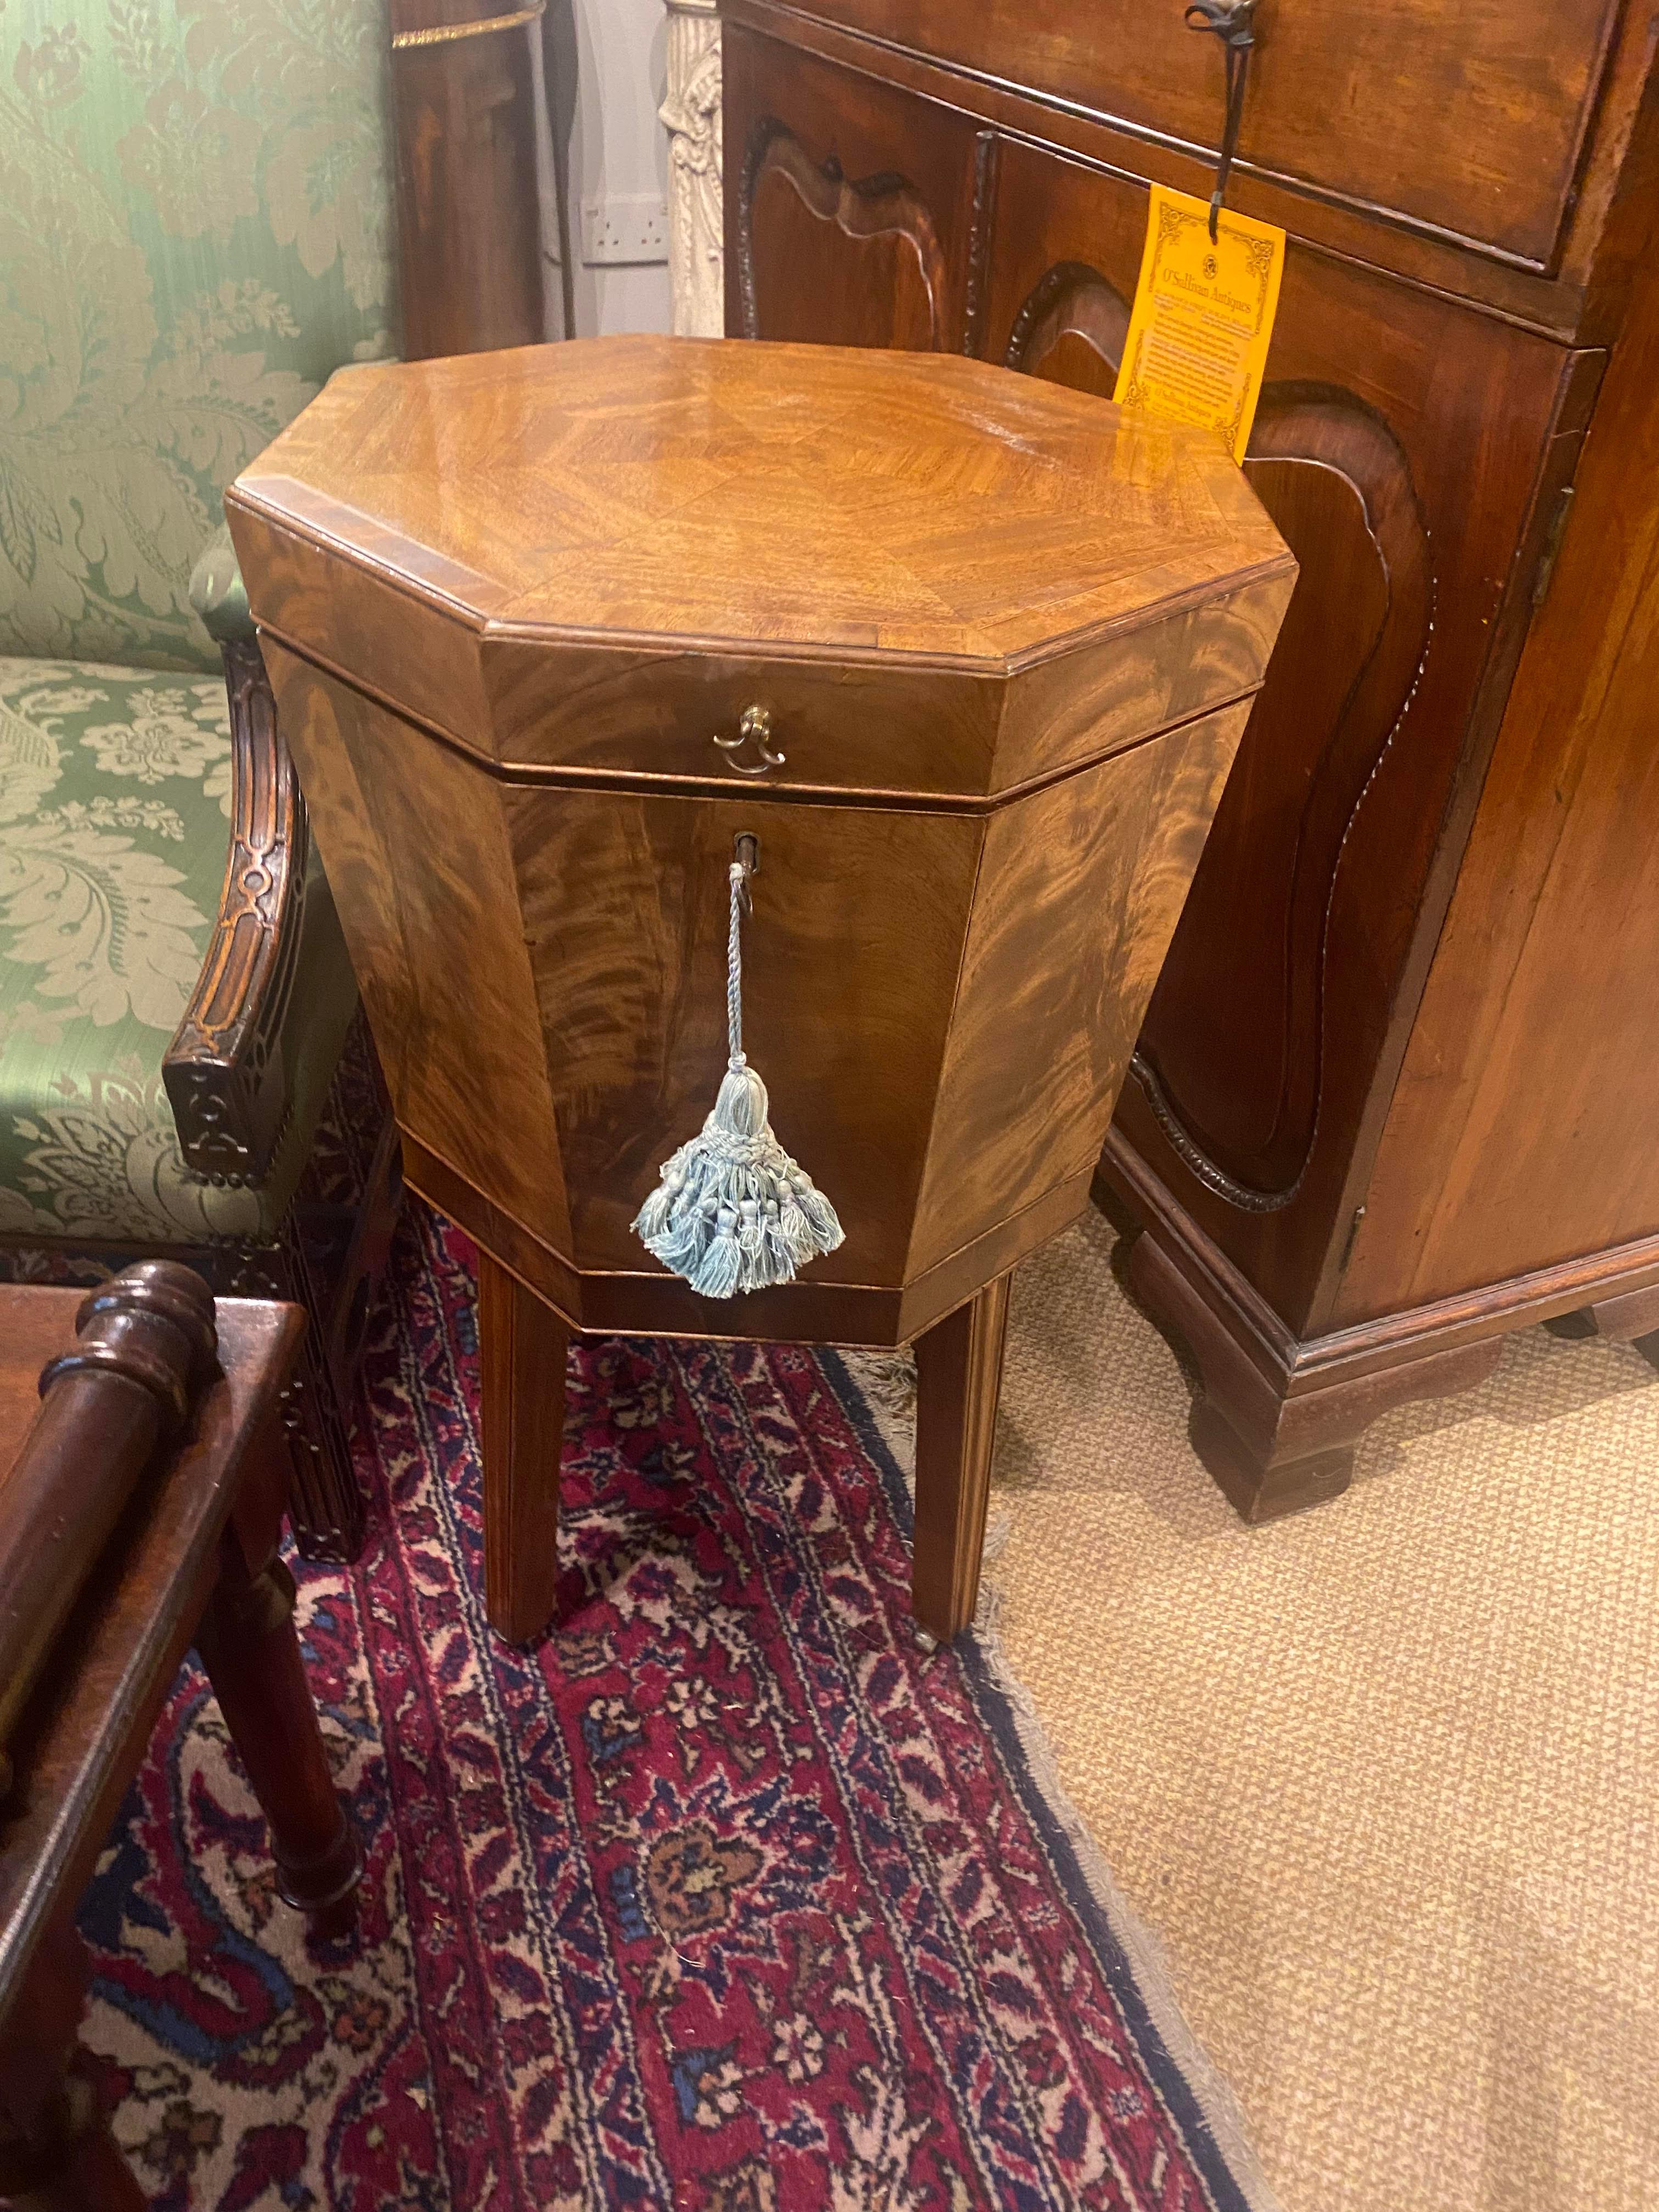 19th Century George III Octagonal Cellarette In Excellent Condition For Sale In Dublin 8, IE